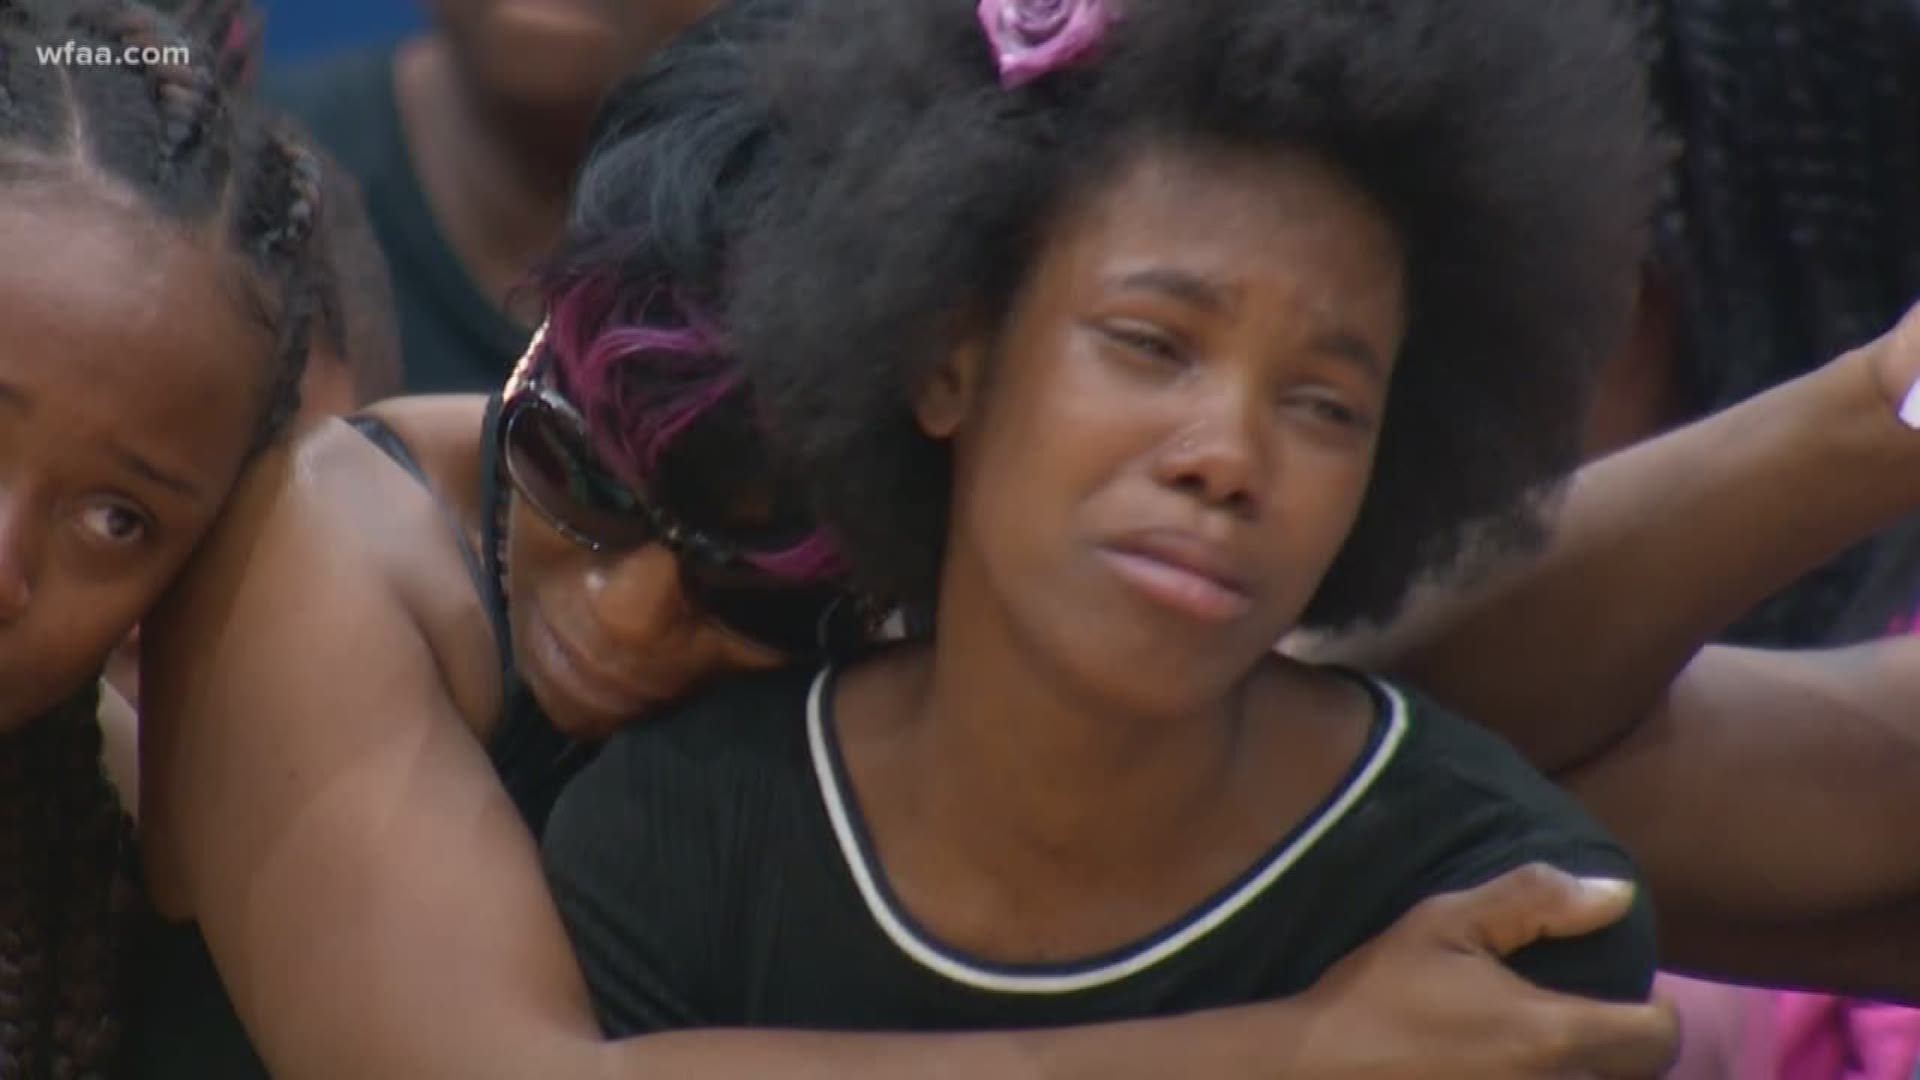 Family members and the community came together Friday night to mourn the death of a 9-year-old girl killed in crossfire. They also declared a week of peace in the city of Dallas.